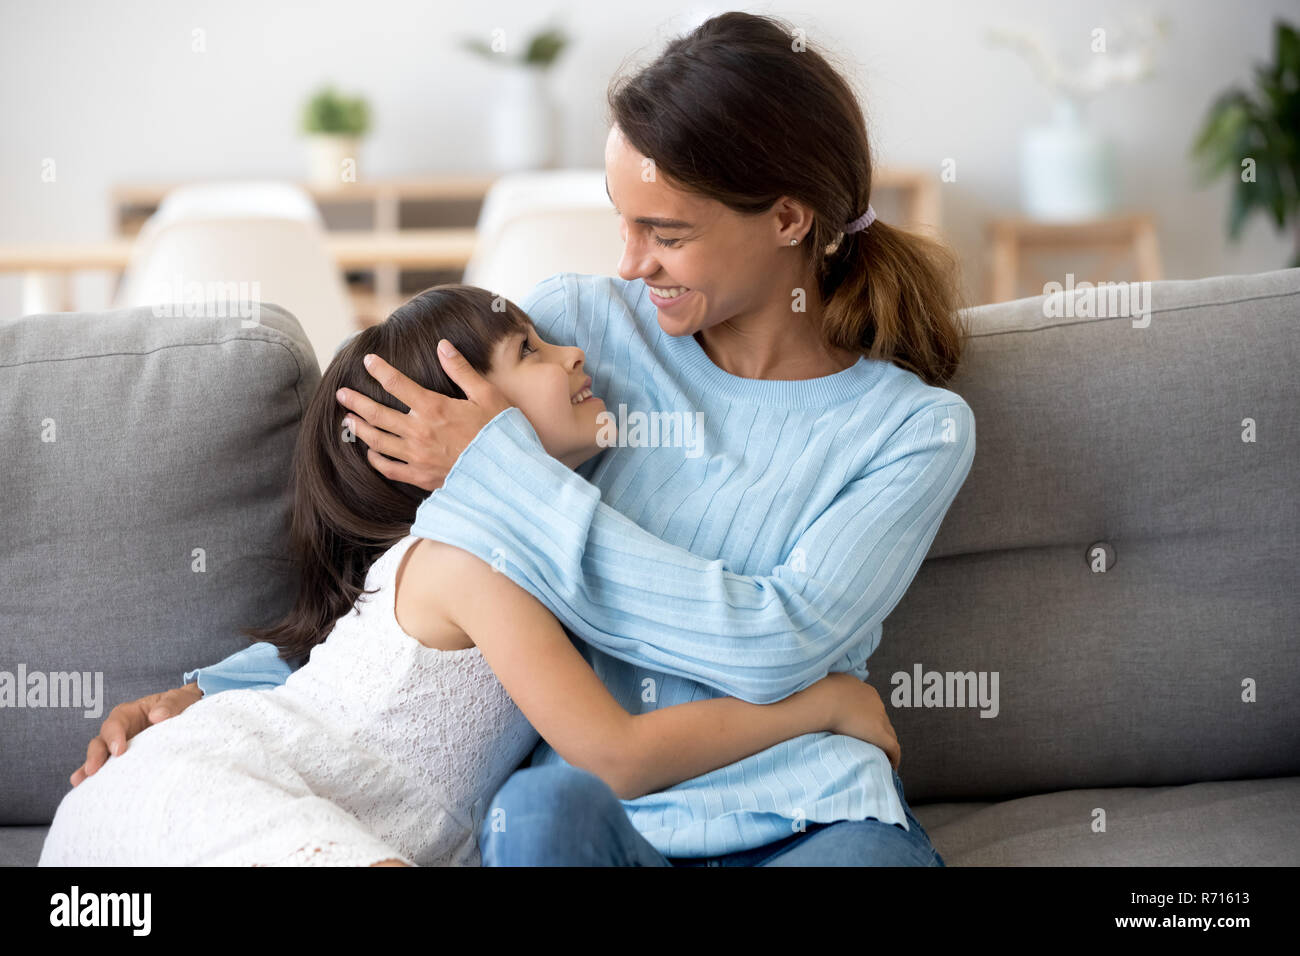 Mulatto mommy and daughter looking at each other sitting indoors Stock Photo